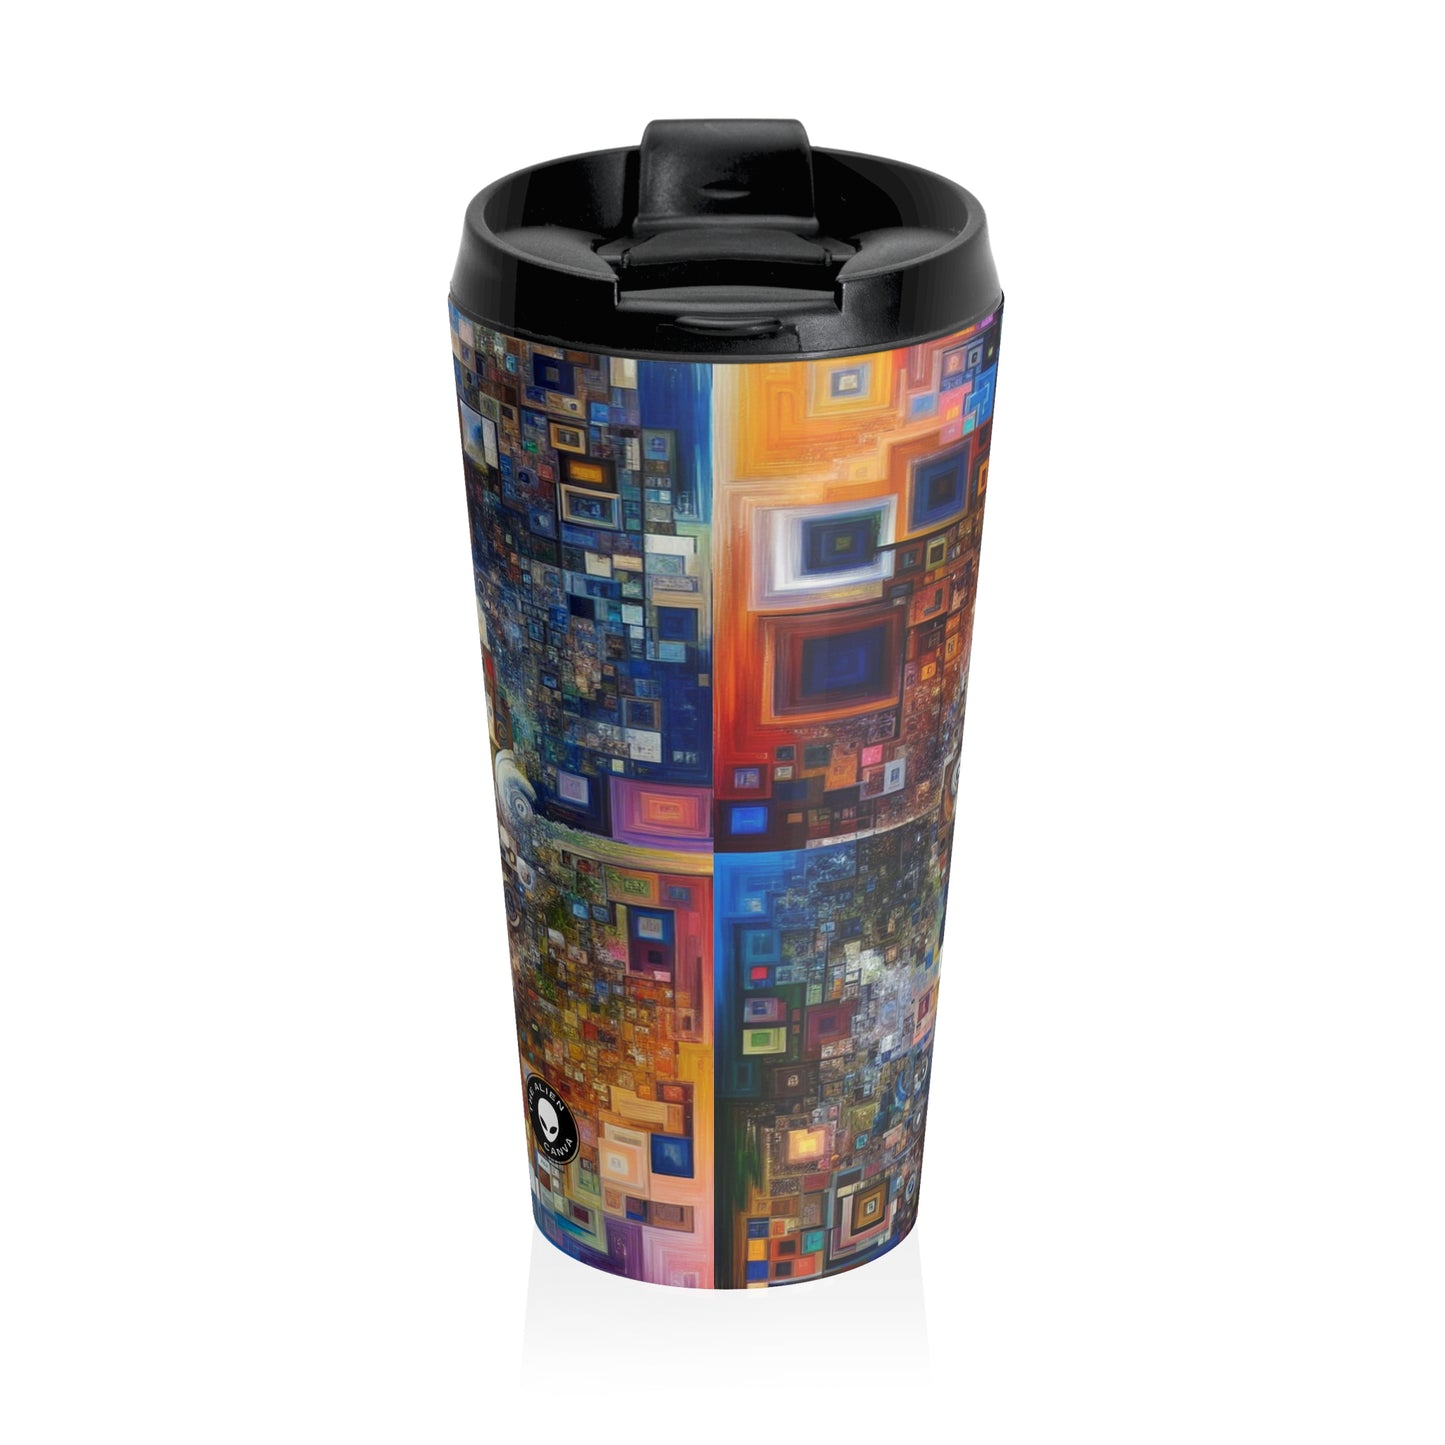 "Perception Distorted: A Postmodern Commentary on Reality" - The Alien Stainless Steel Travel Mug Postmodern Art